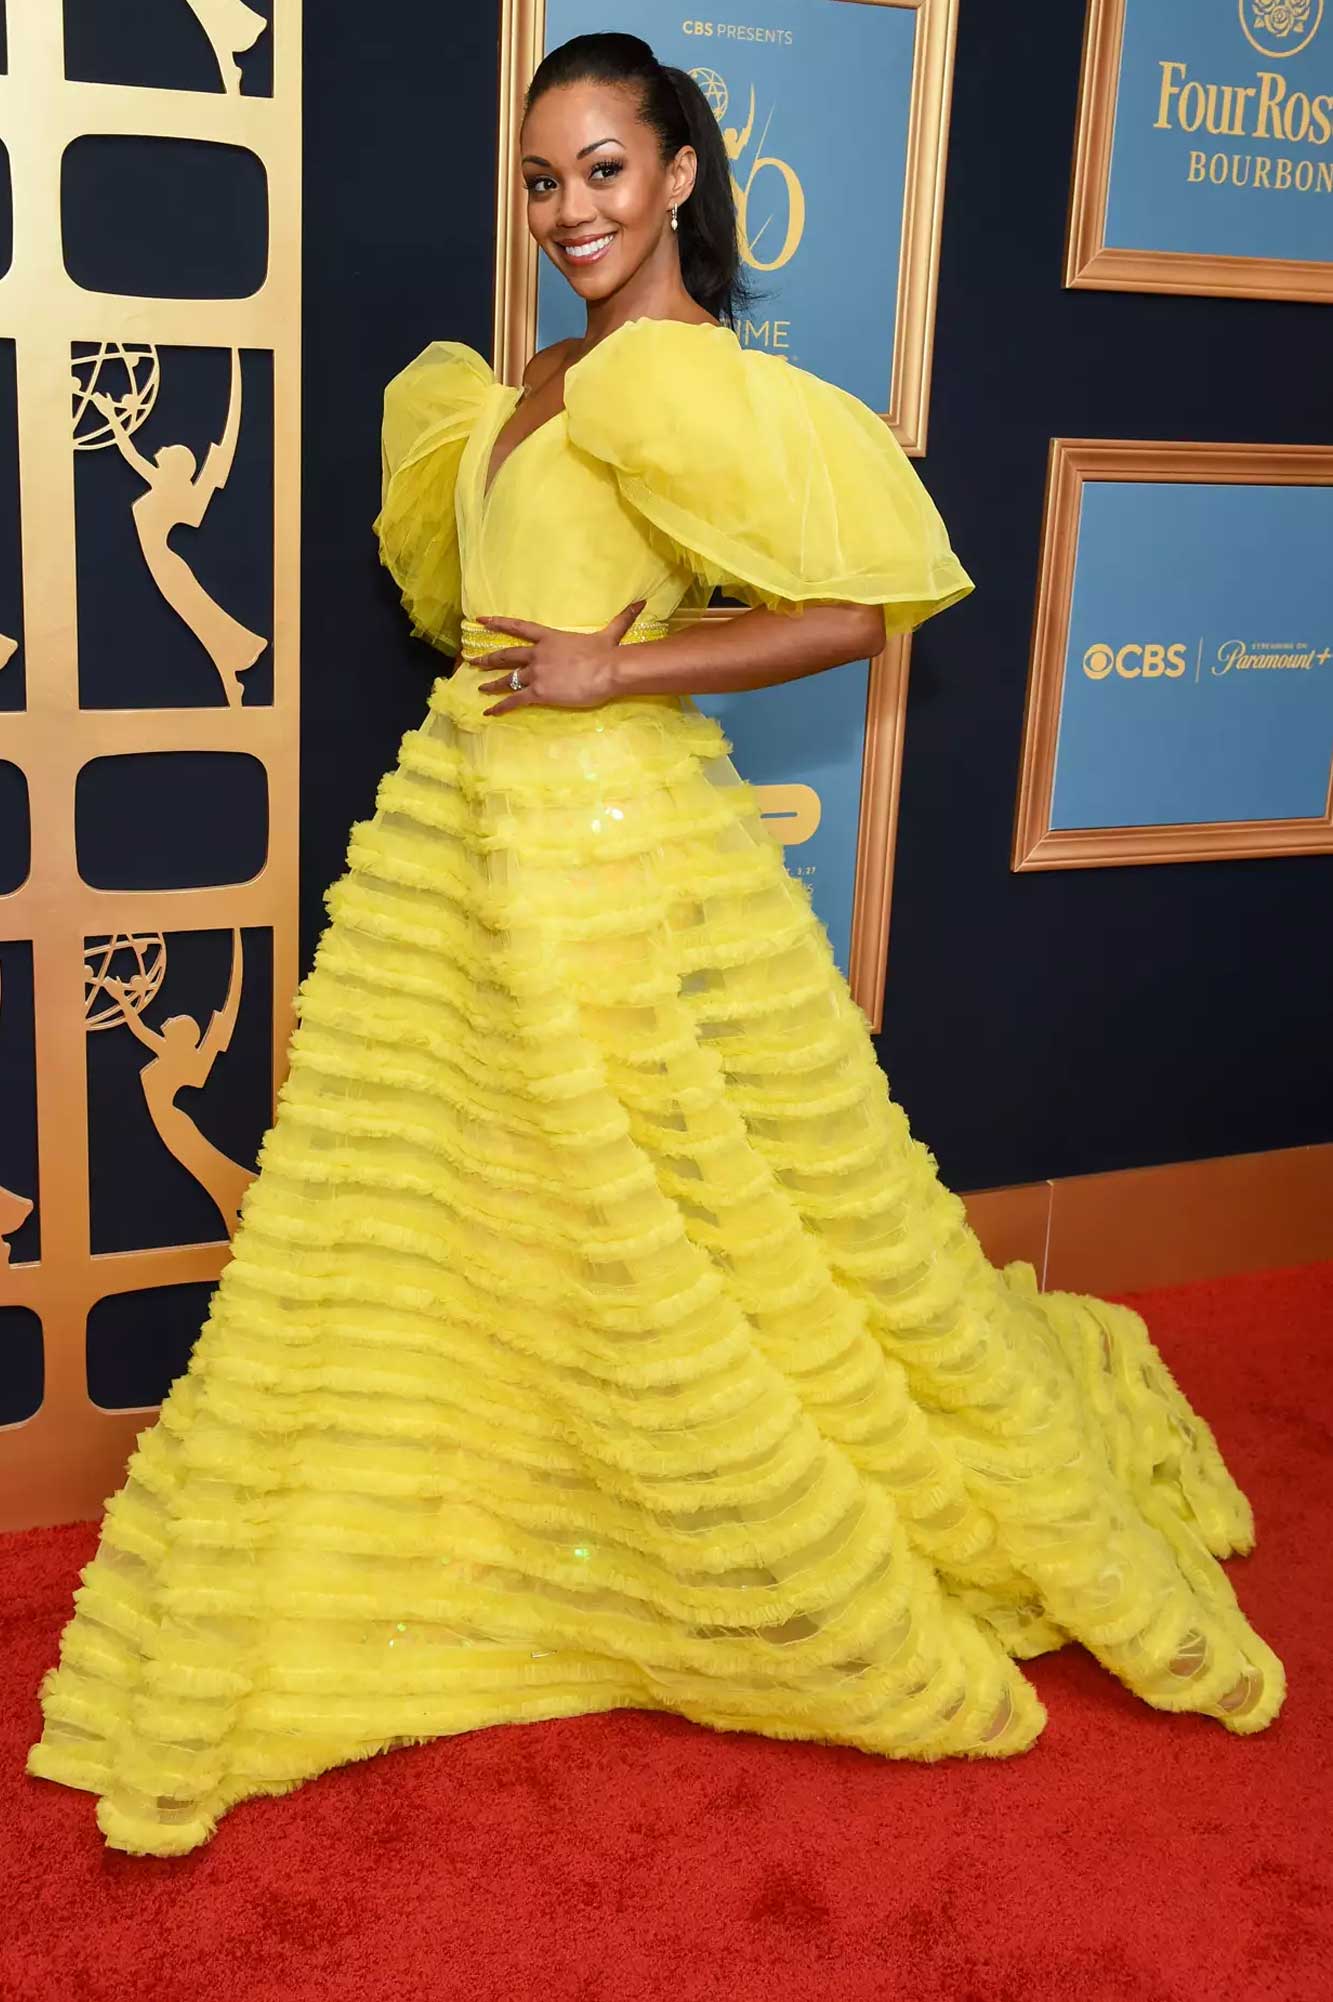 Mishael Morgan lit up the red carpet in a yellow dress